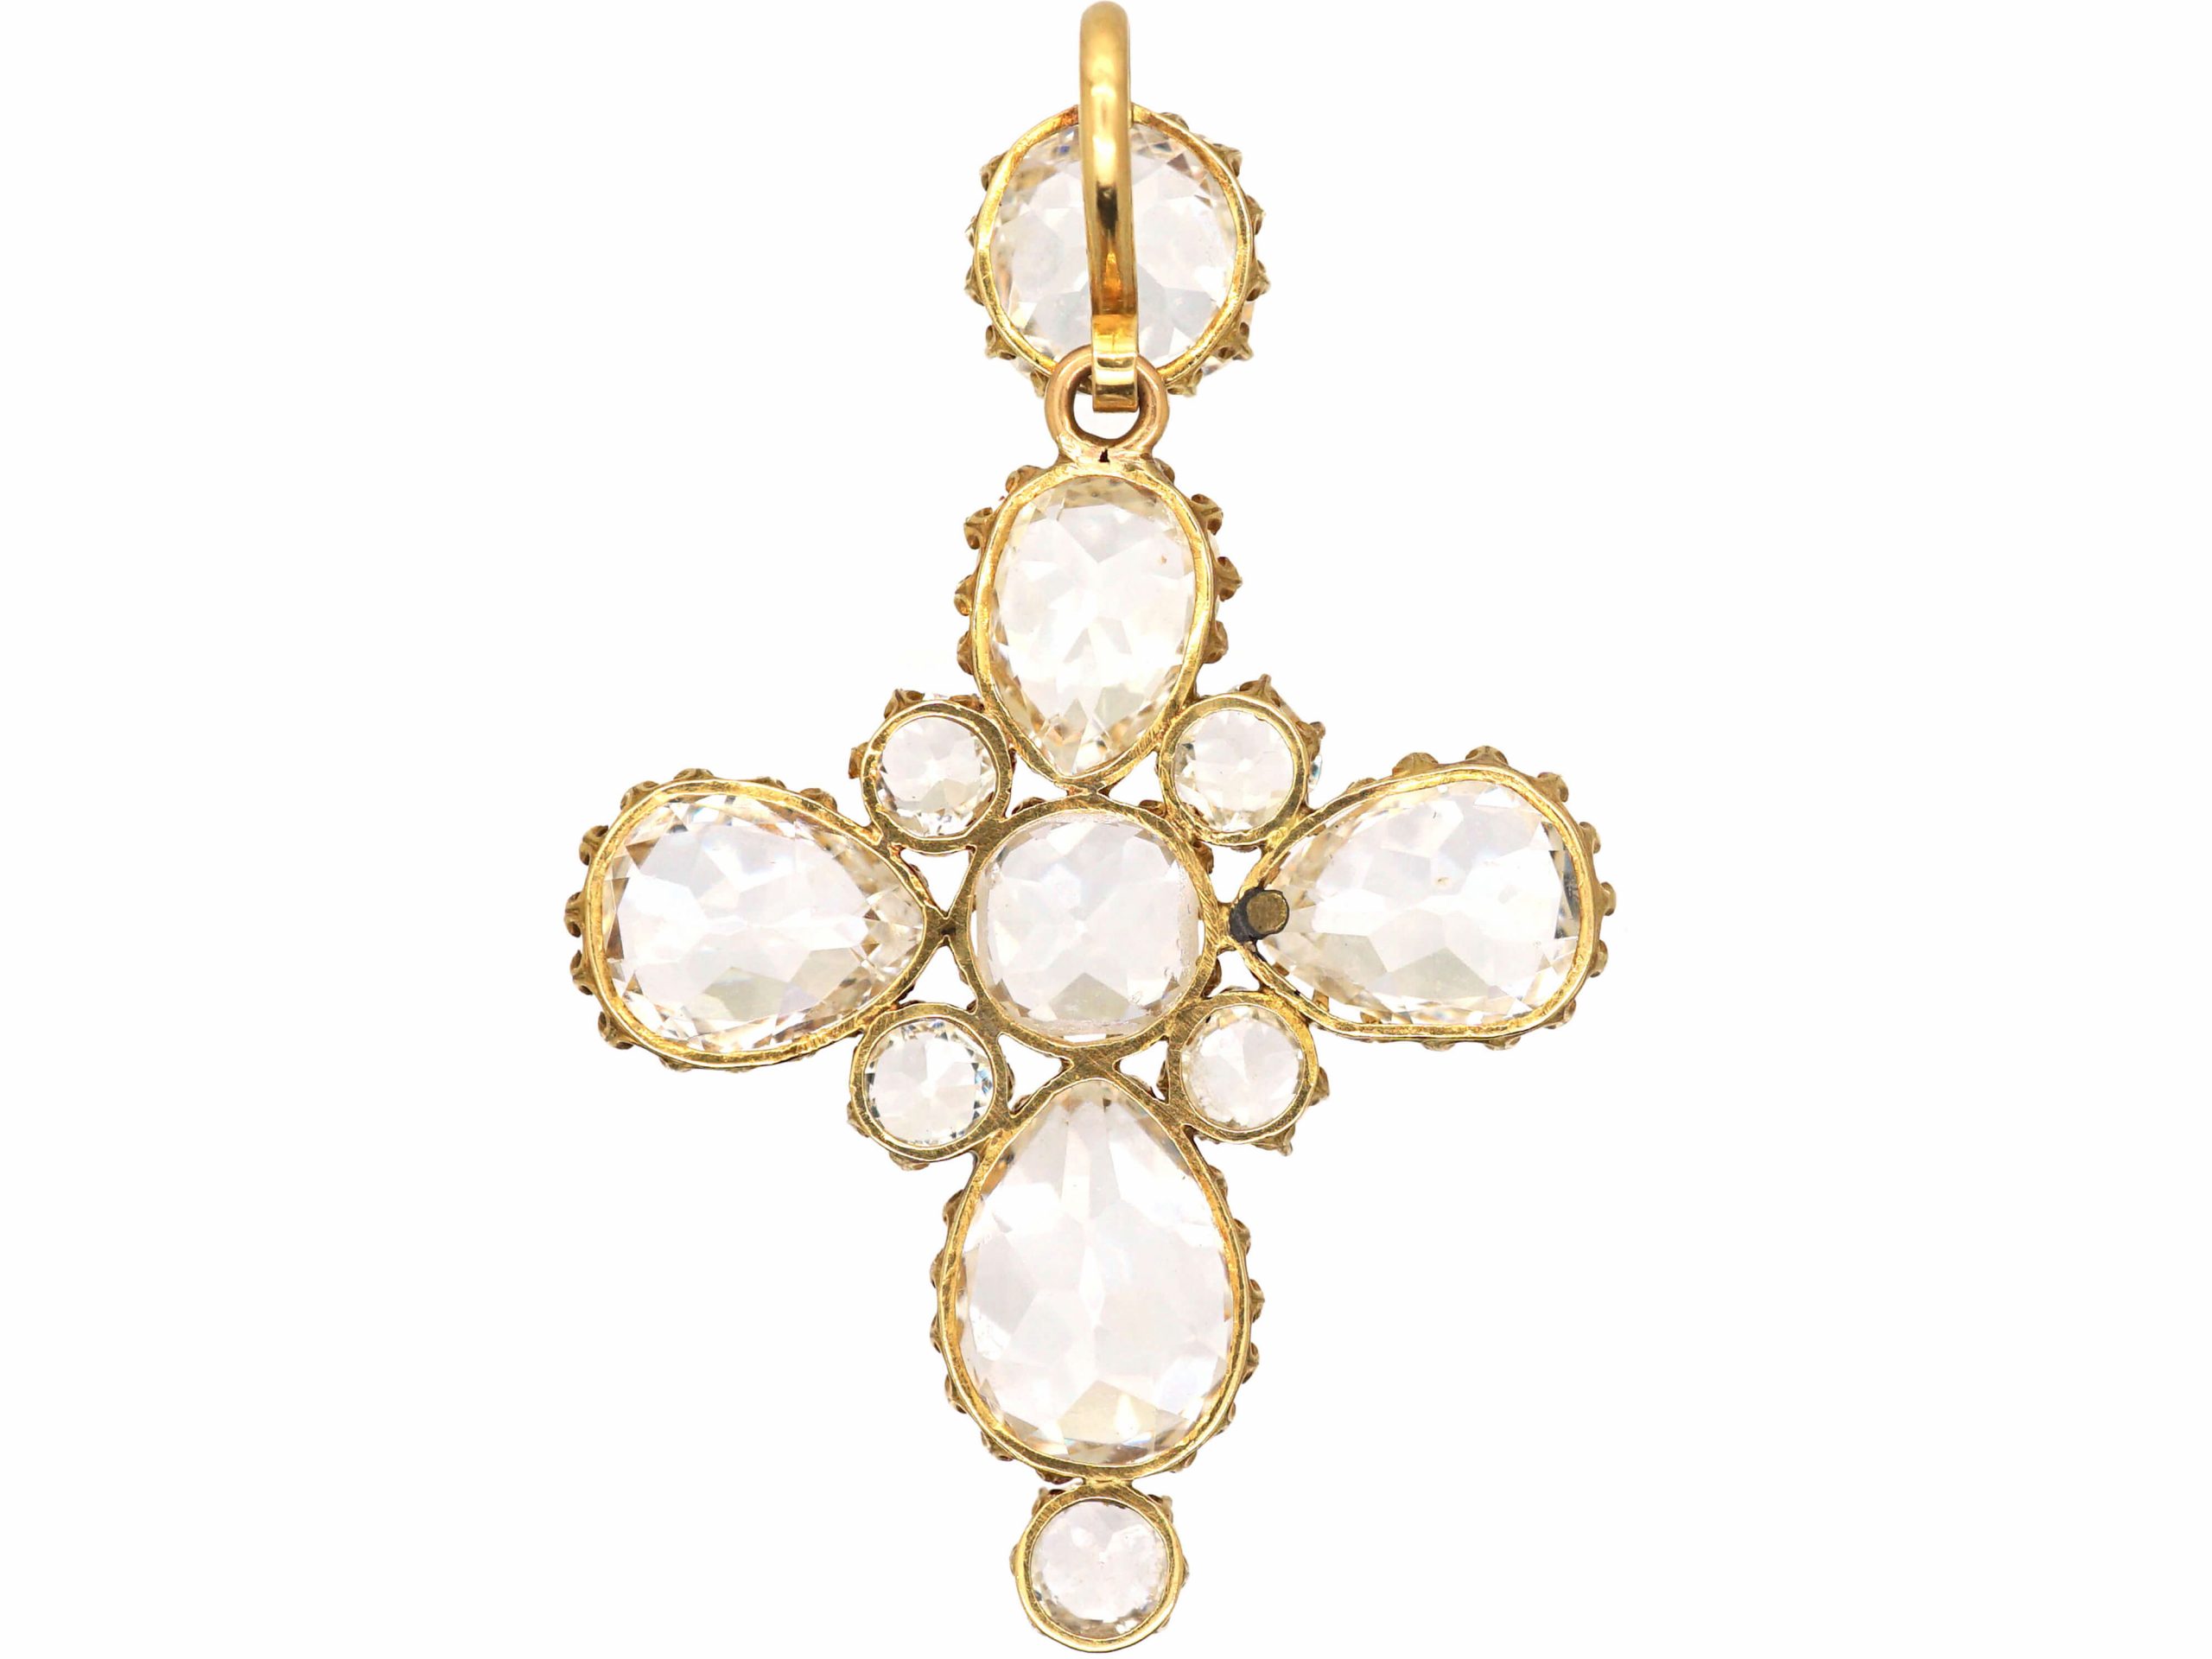 Early Victorian 18ct Gold & Rock Crystal Cross (199U) | The Antique ...